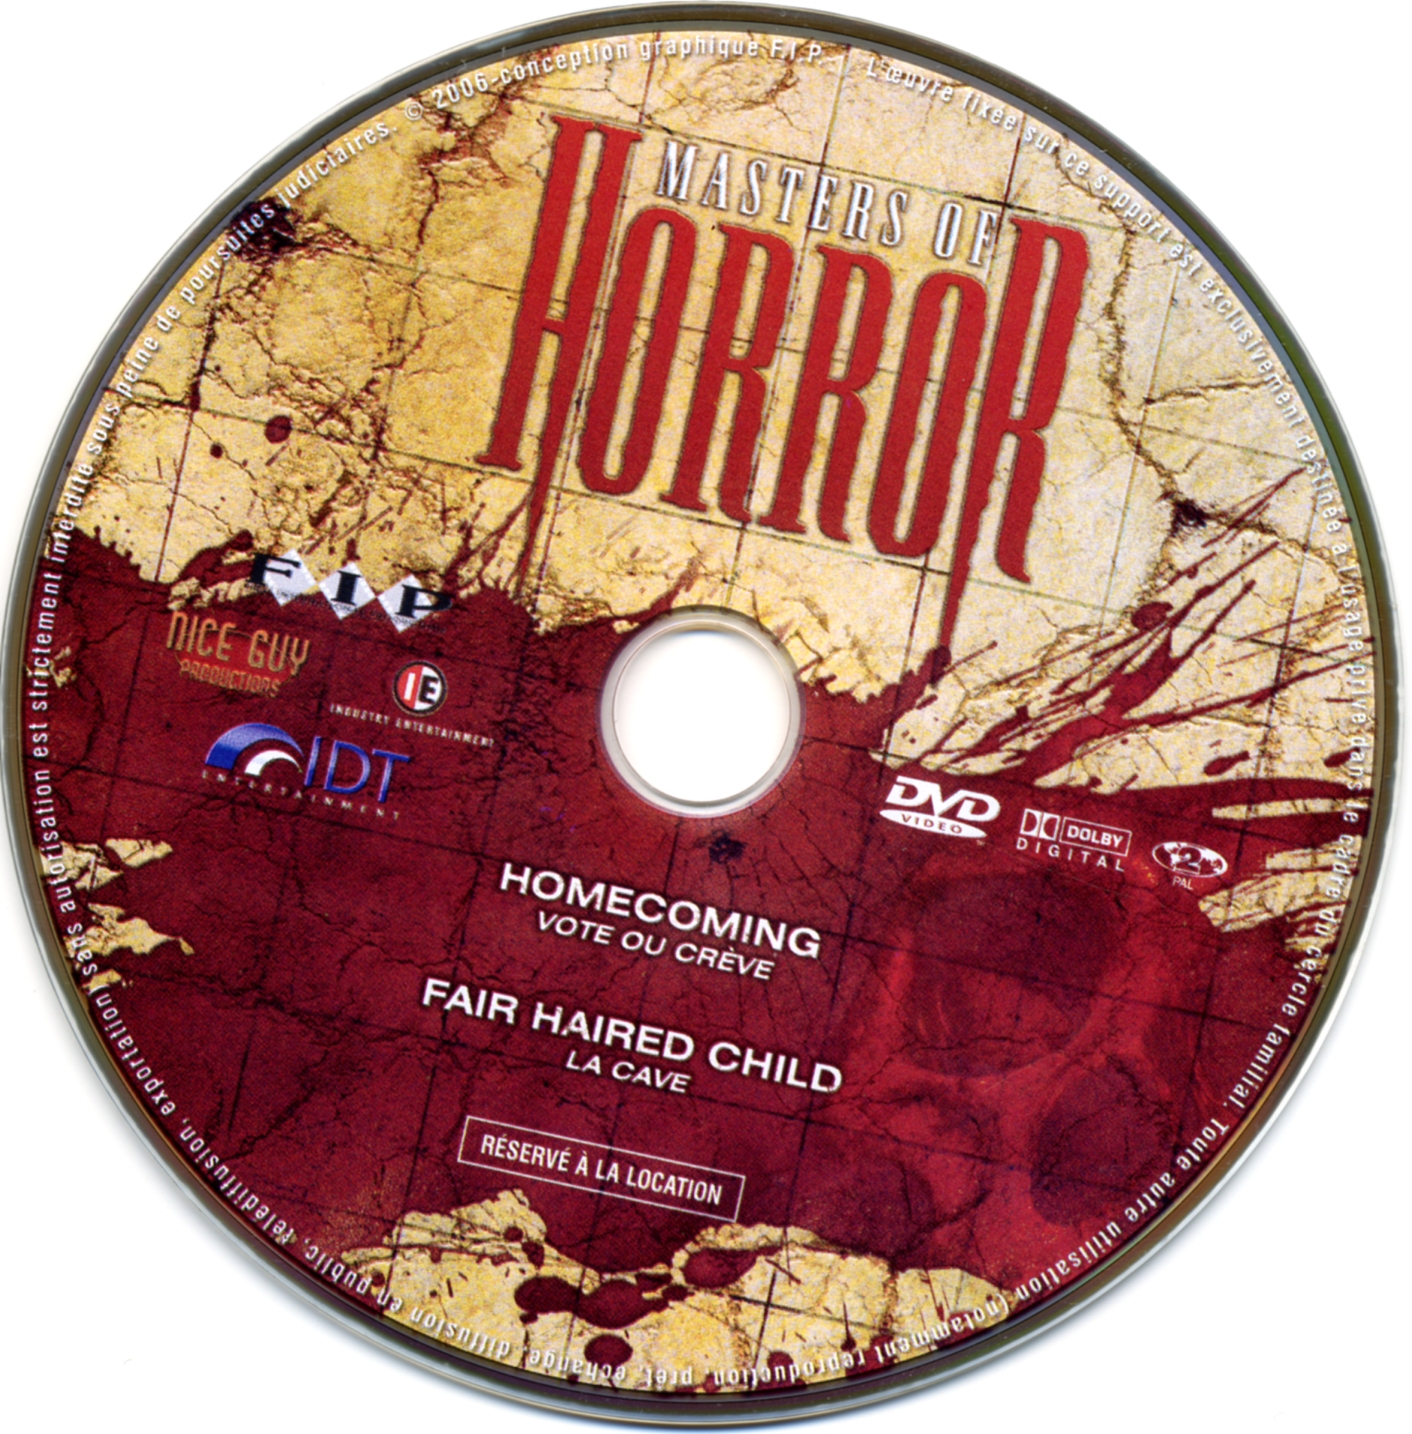 Masters of horror - homecoming